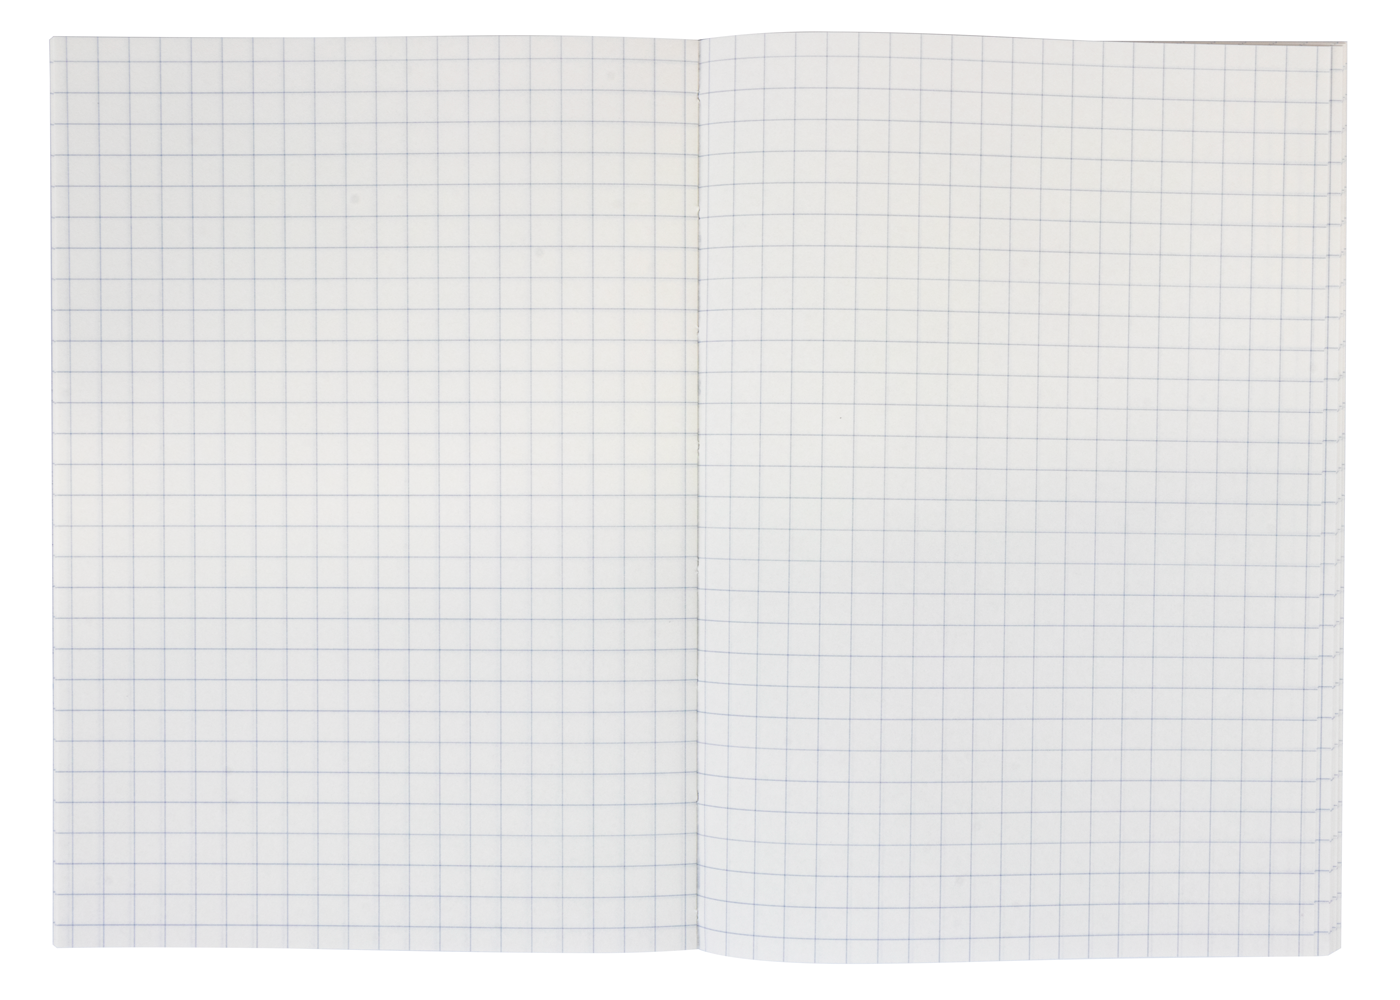 Tomoe River White A6 Notebook 5mm Grid